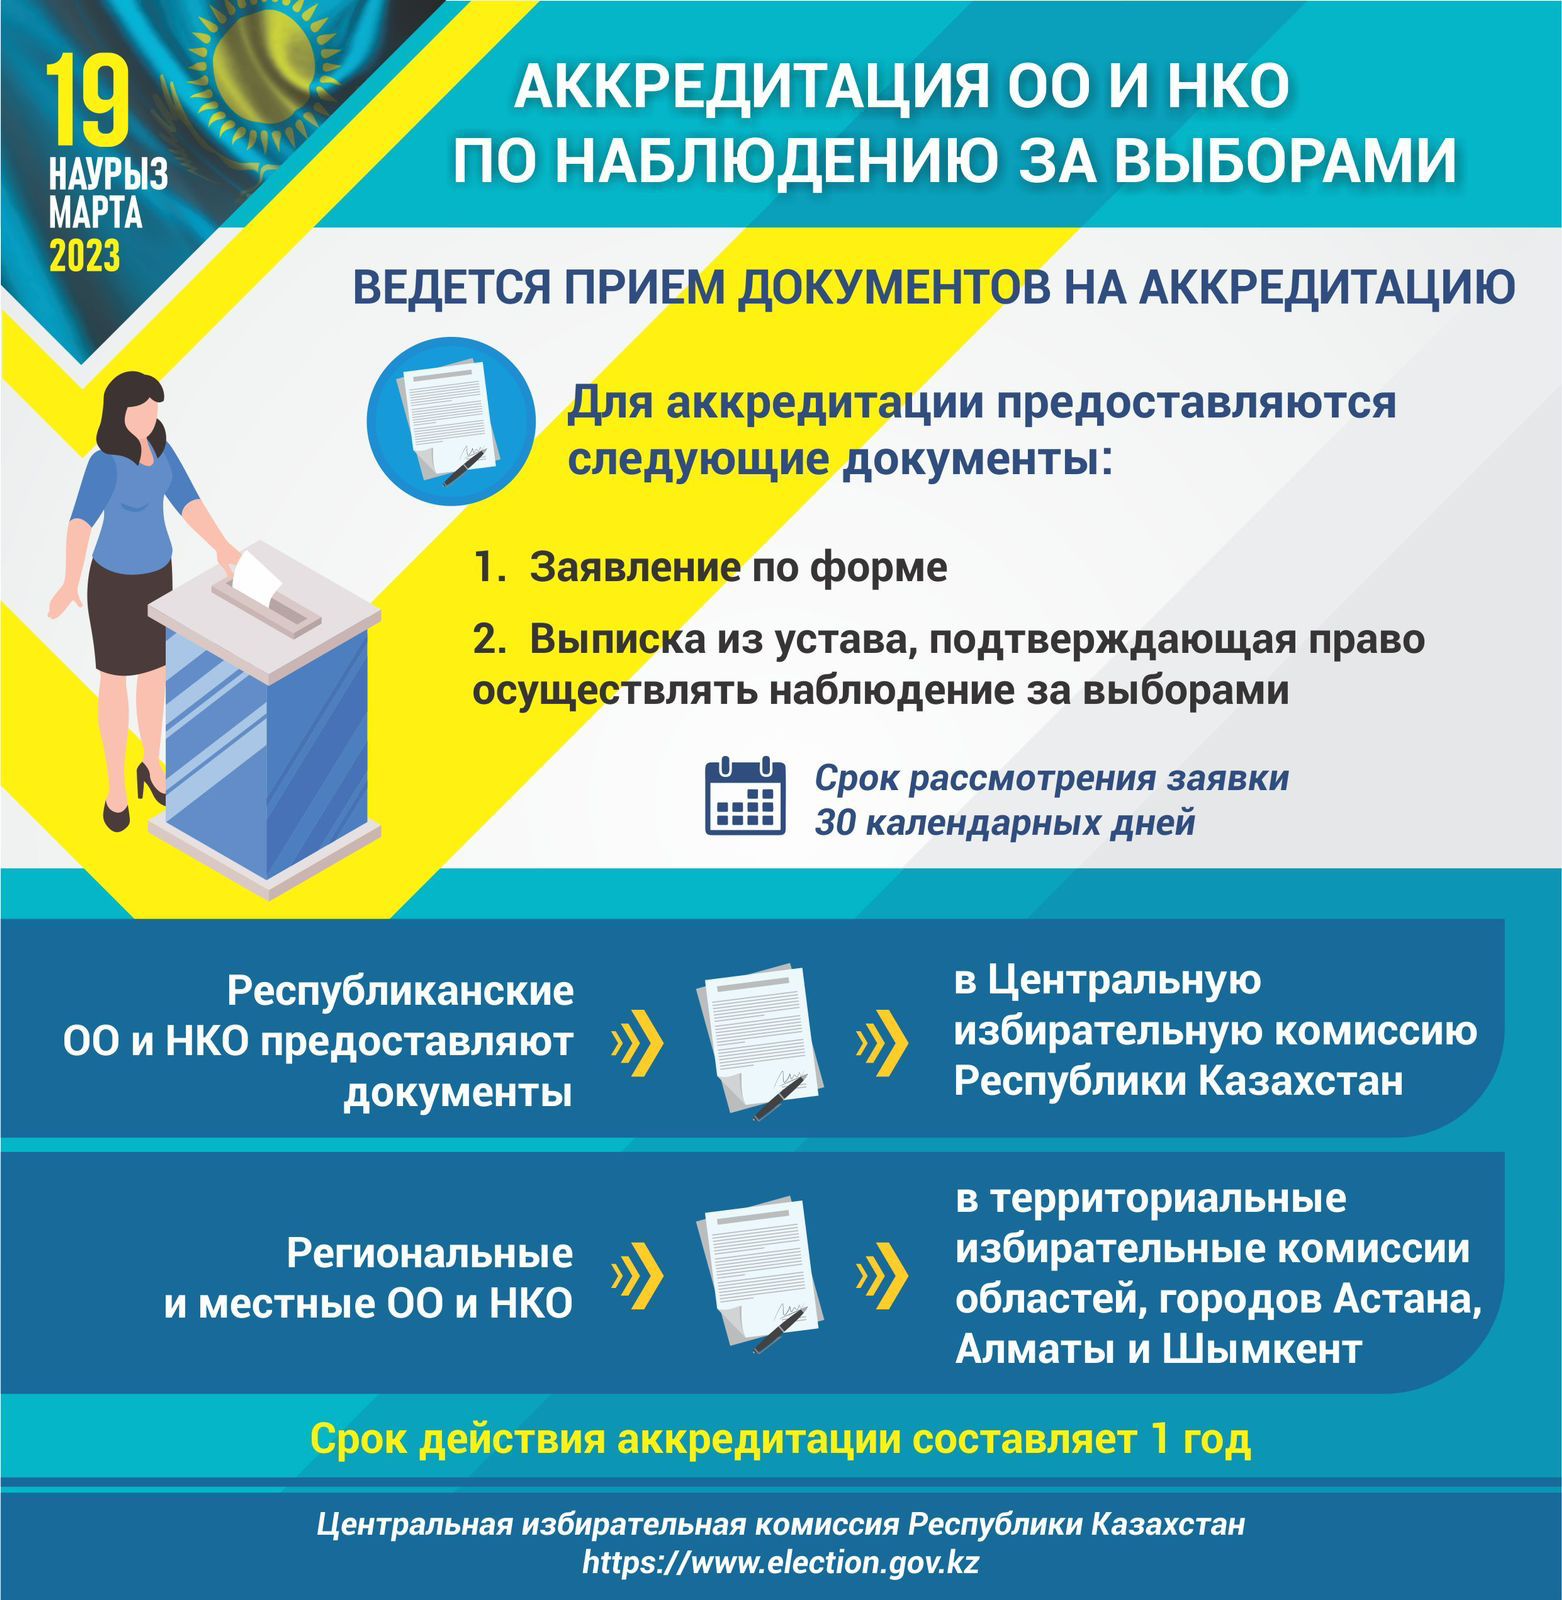 Accreditation of NGO and NGO for election observation